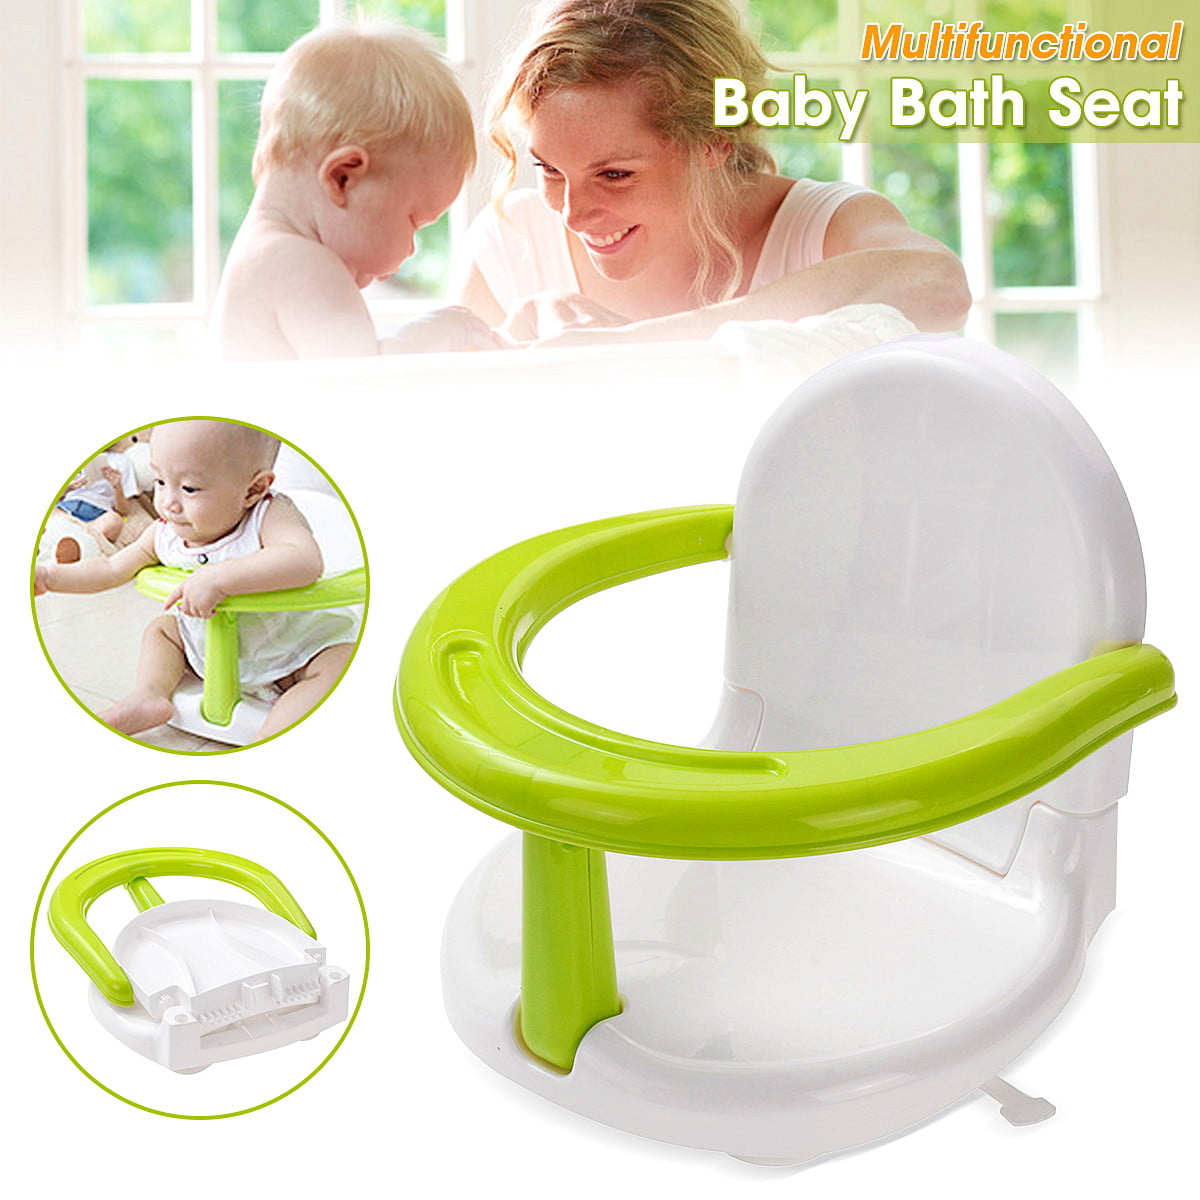 Hamkaw Foldable Baby Bath Seat Baby Bathtub Seat for Sit Up Bathing with Backrest Support Infant Shower Safety Seat Non Skip Green 